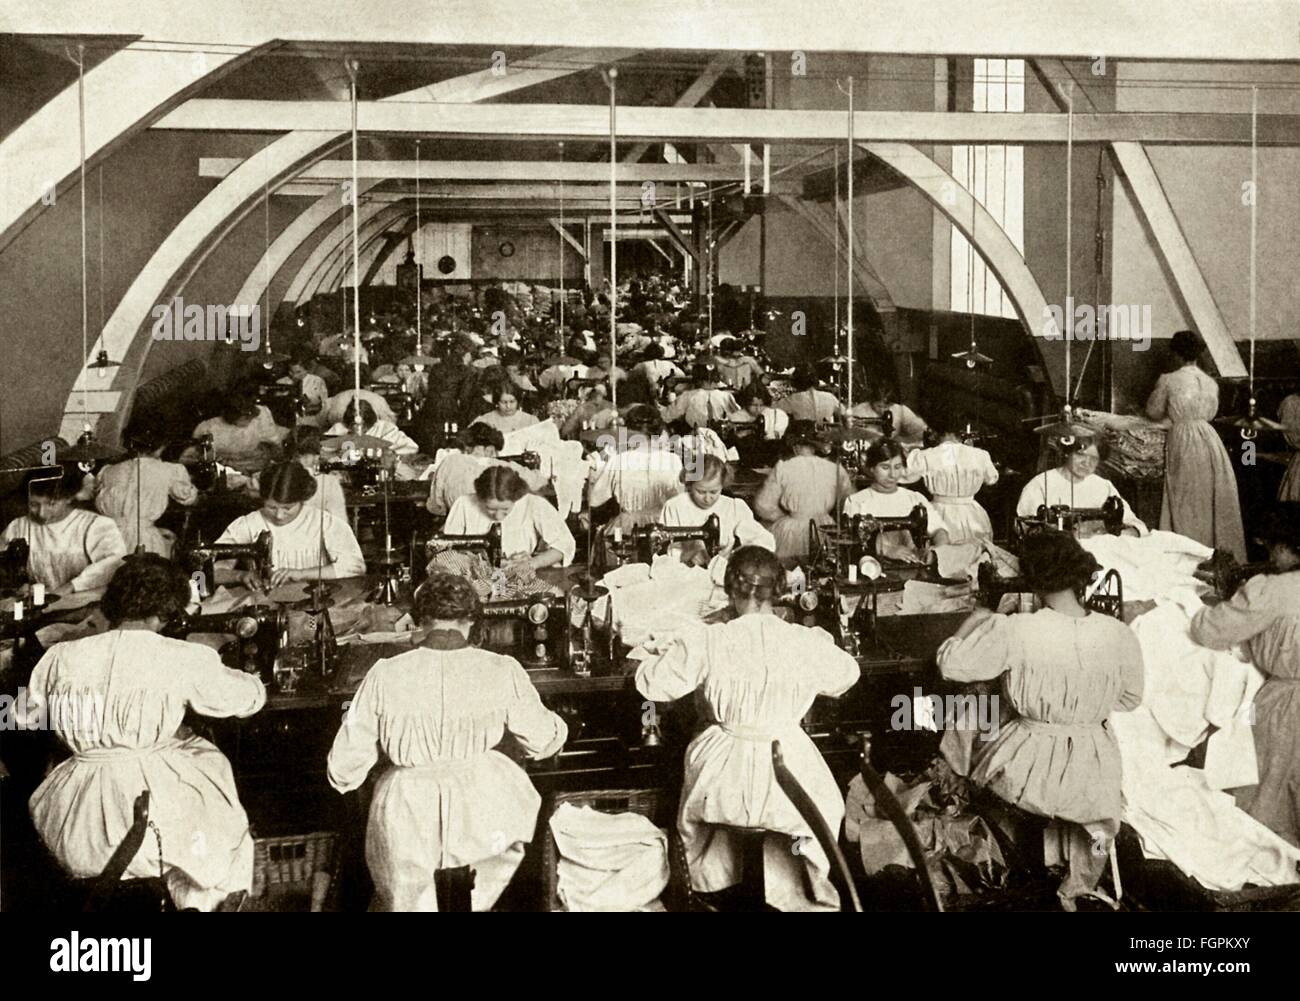 people, profession, seamstress, sempstresses at sewing machines sewing work clothes, apron, stockings, wool, hosiery, notions in the textile factory of F. W. Brueggelmann and sons, overview across the sewing hall, Cologne, Germany, 1913, Additional-Rights-Clearences-Not Available Stock Photo